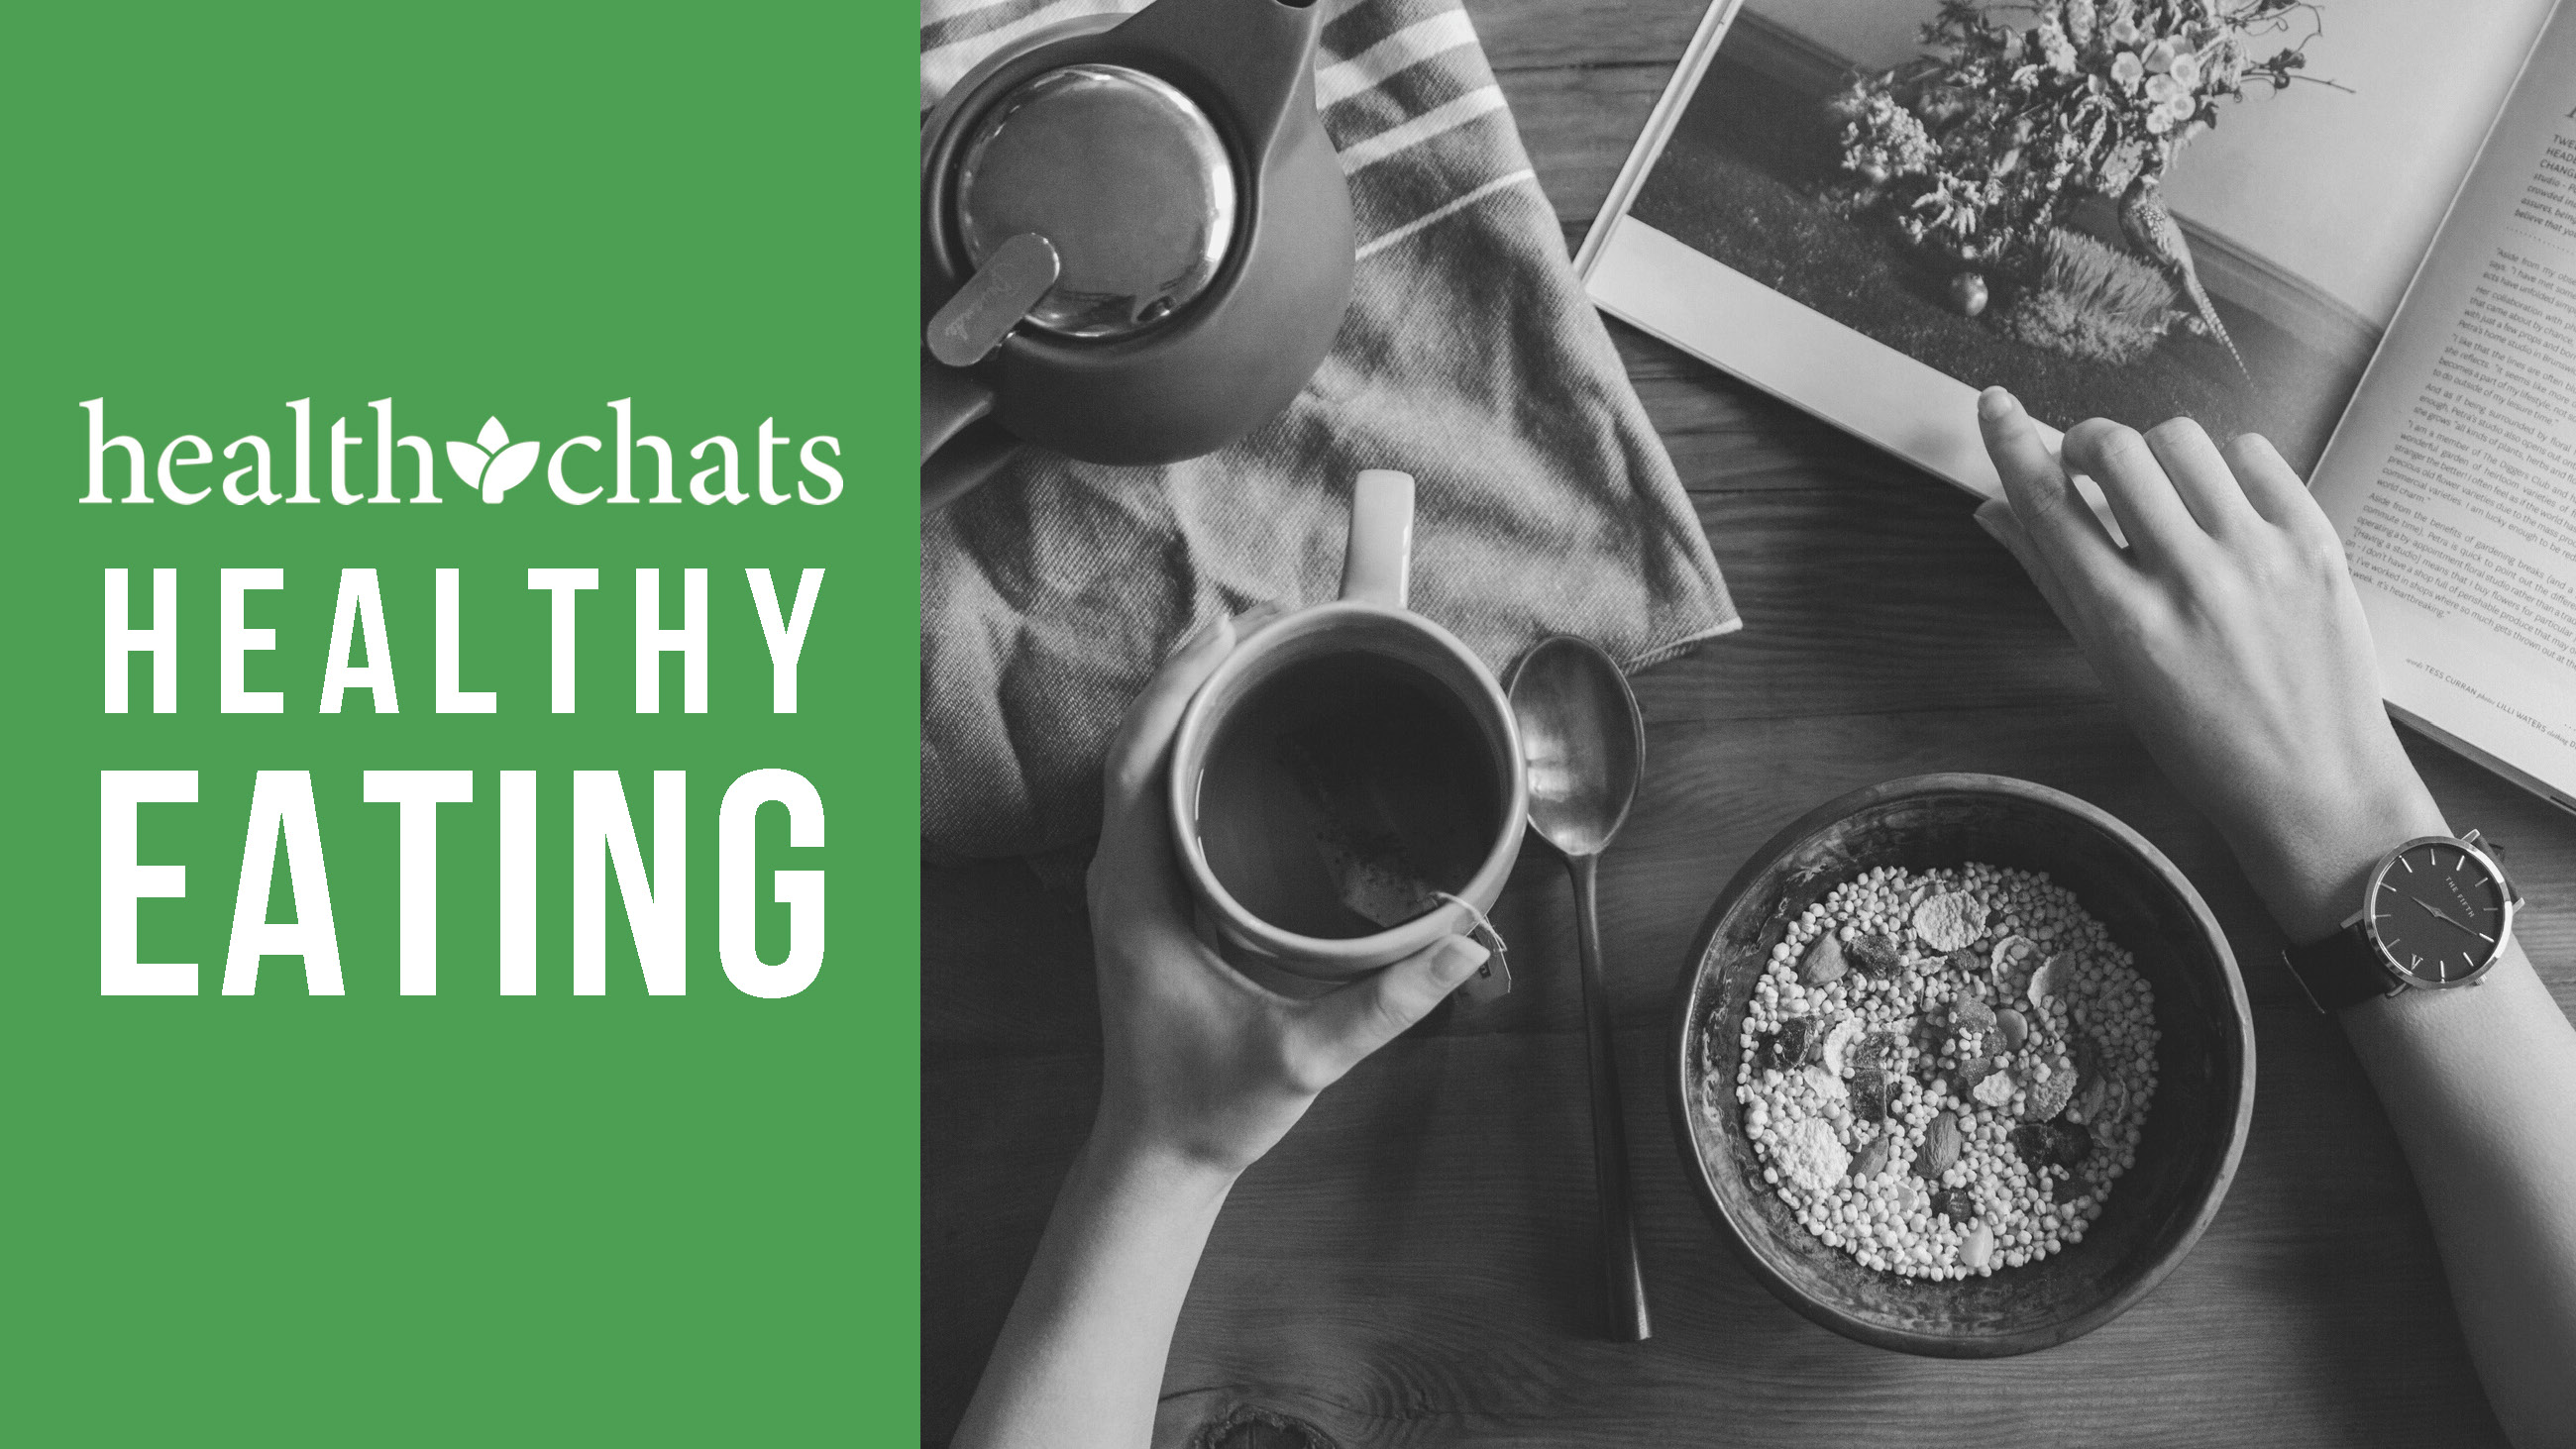 HealthChats: Healthy Eating